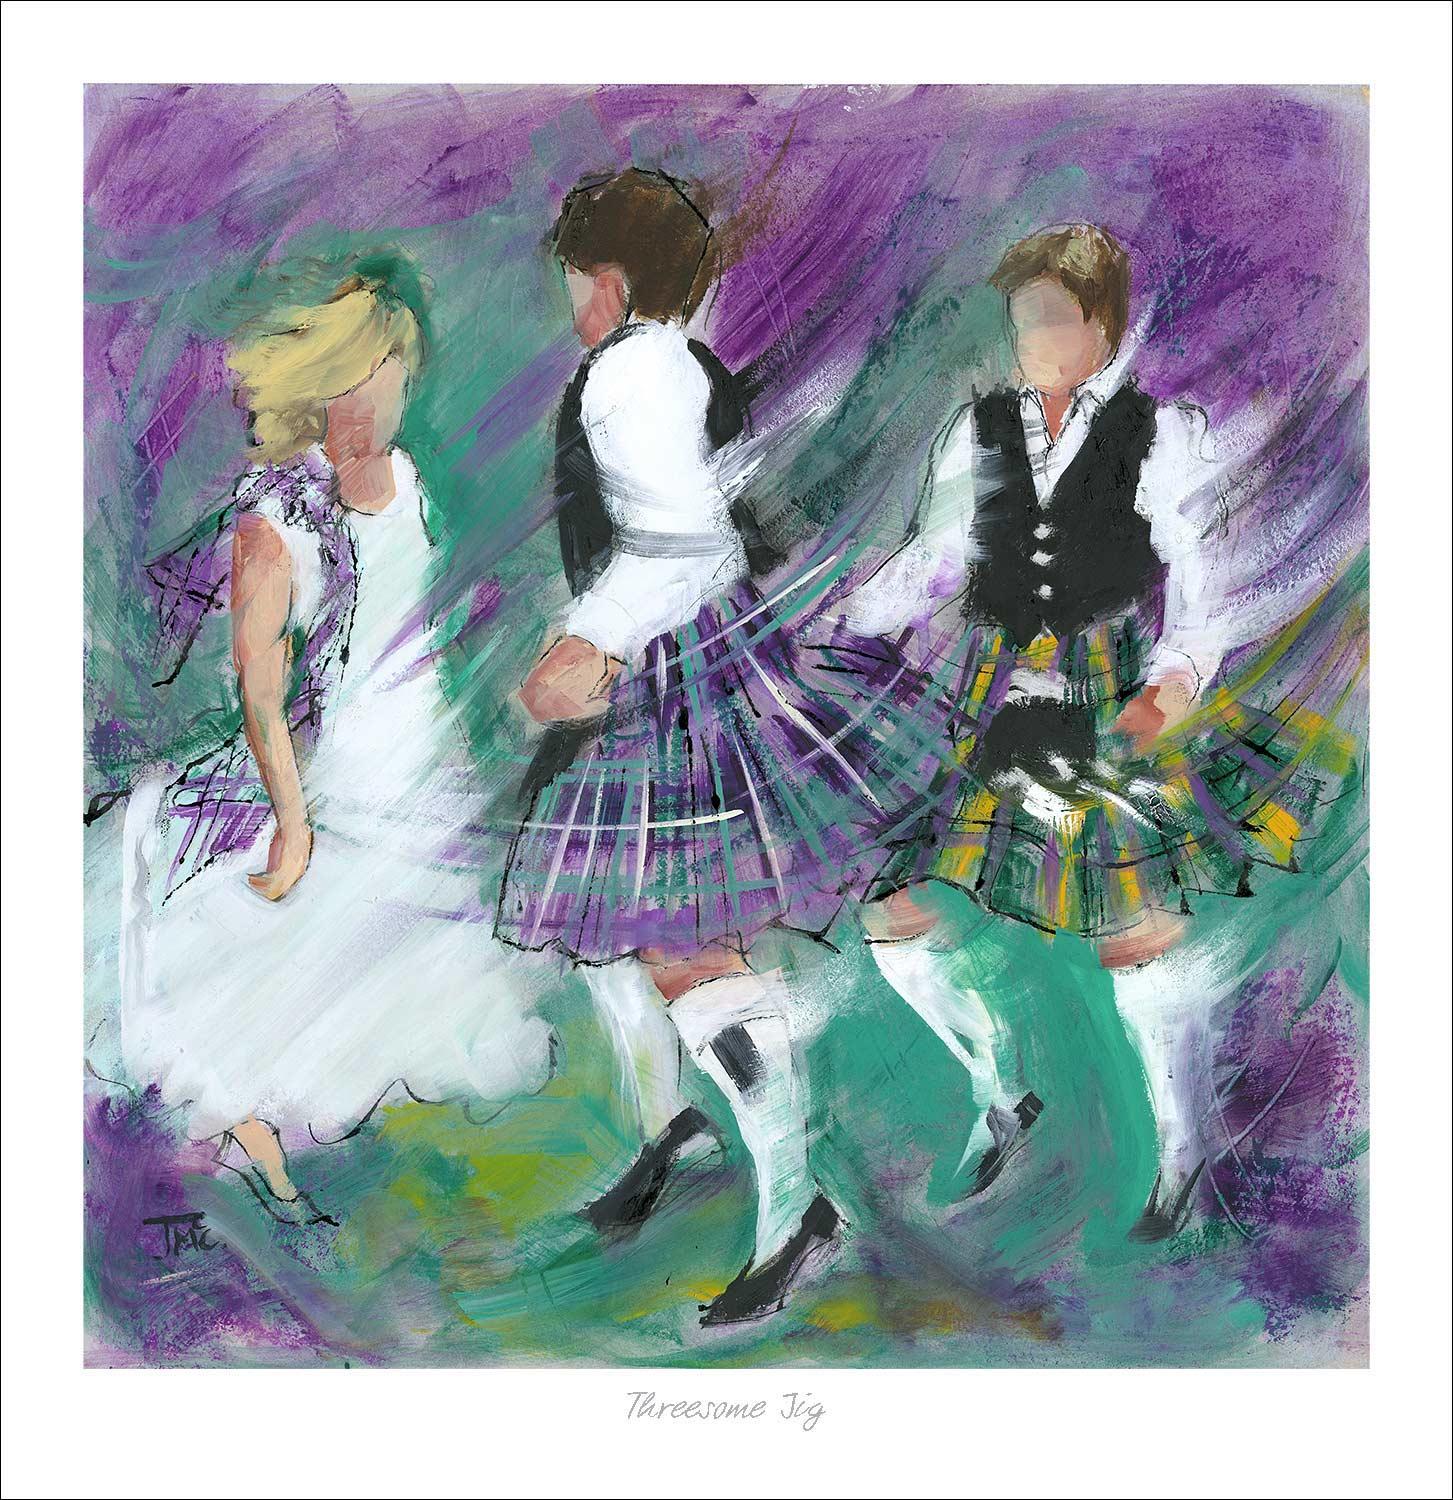 Threesome Jig Art Print from an original painting by artist Janet McCrorie